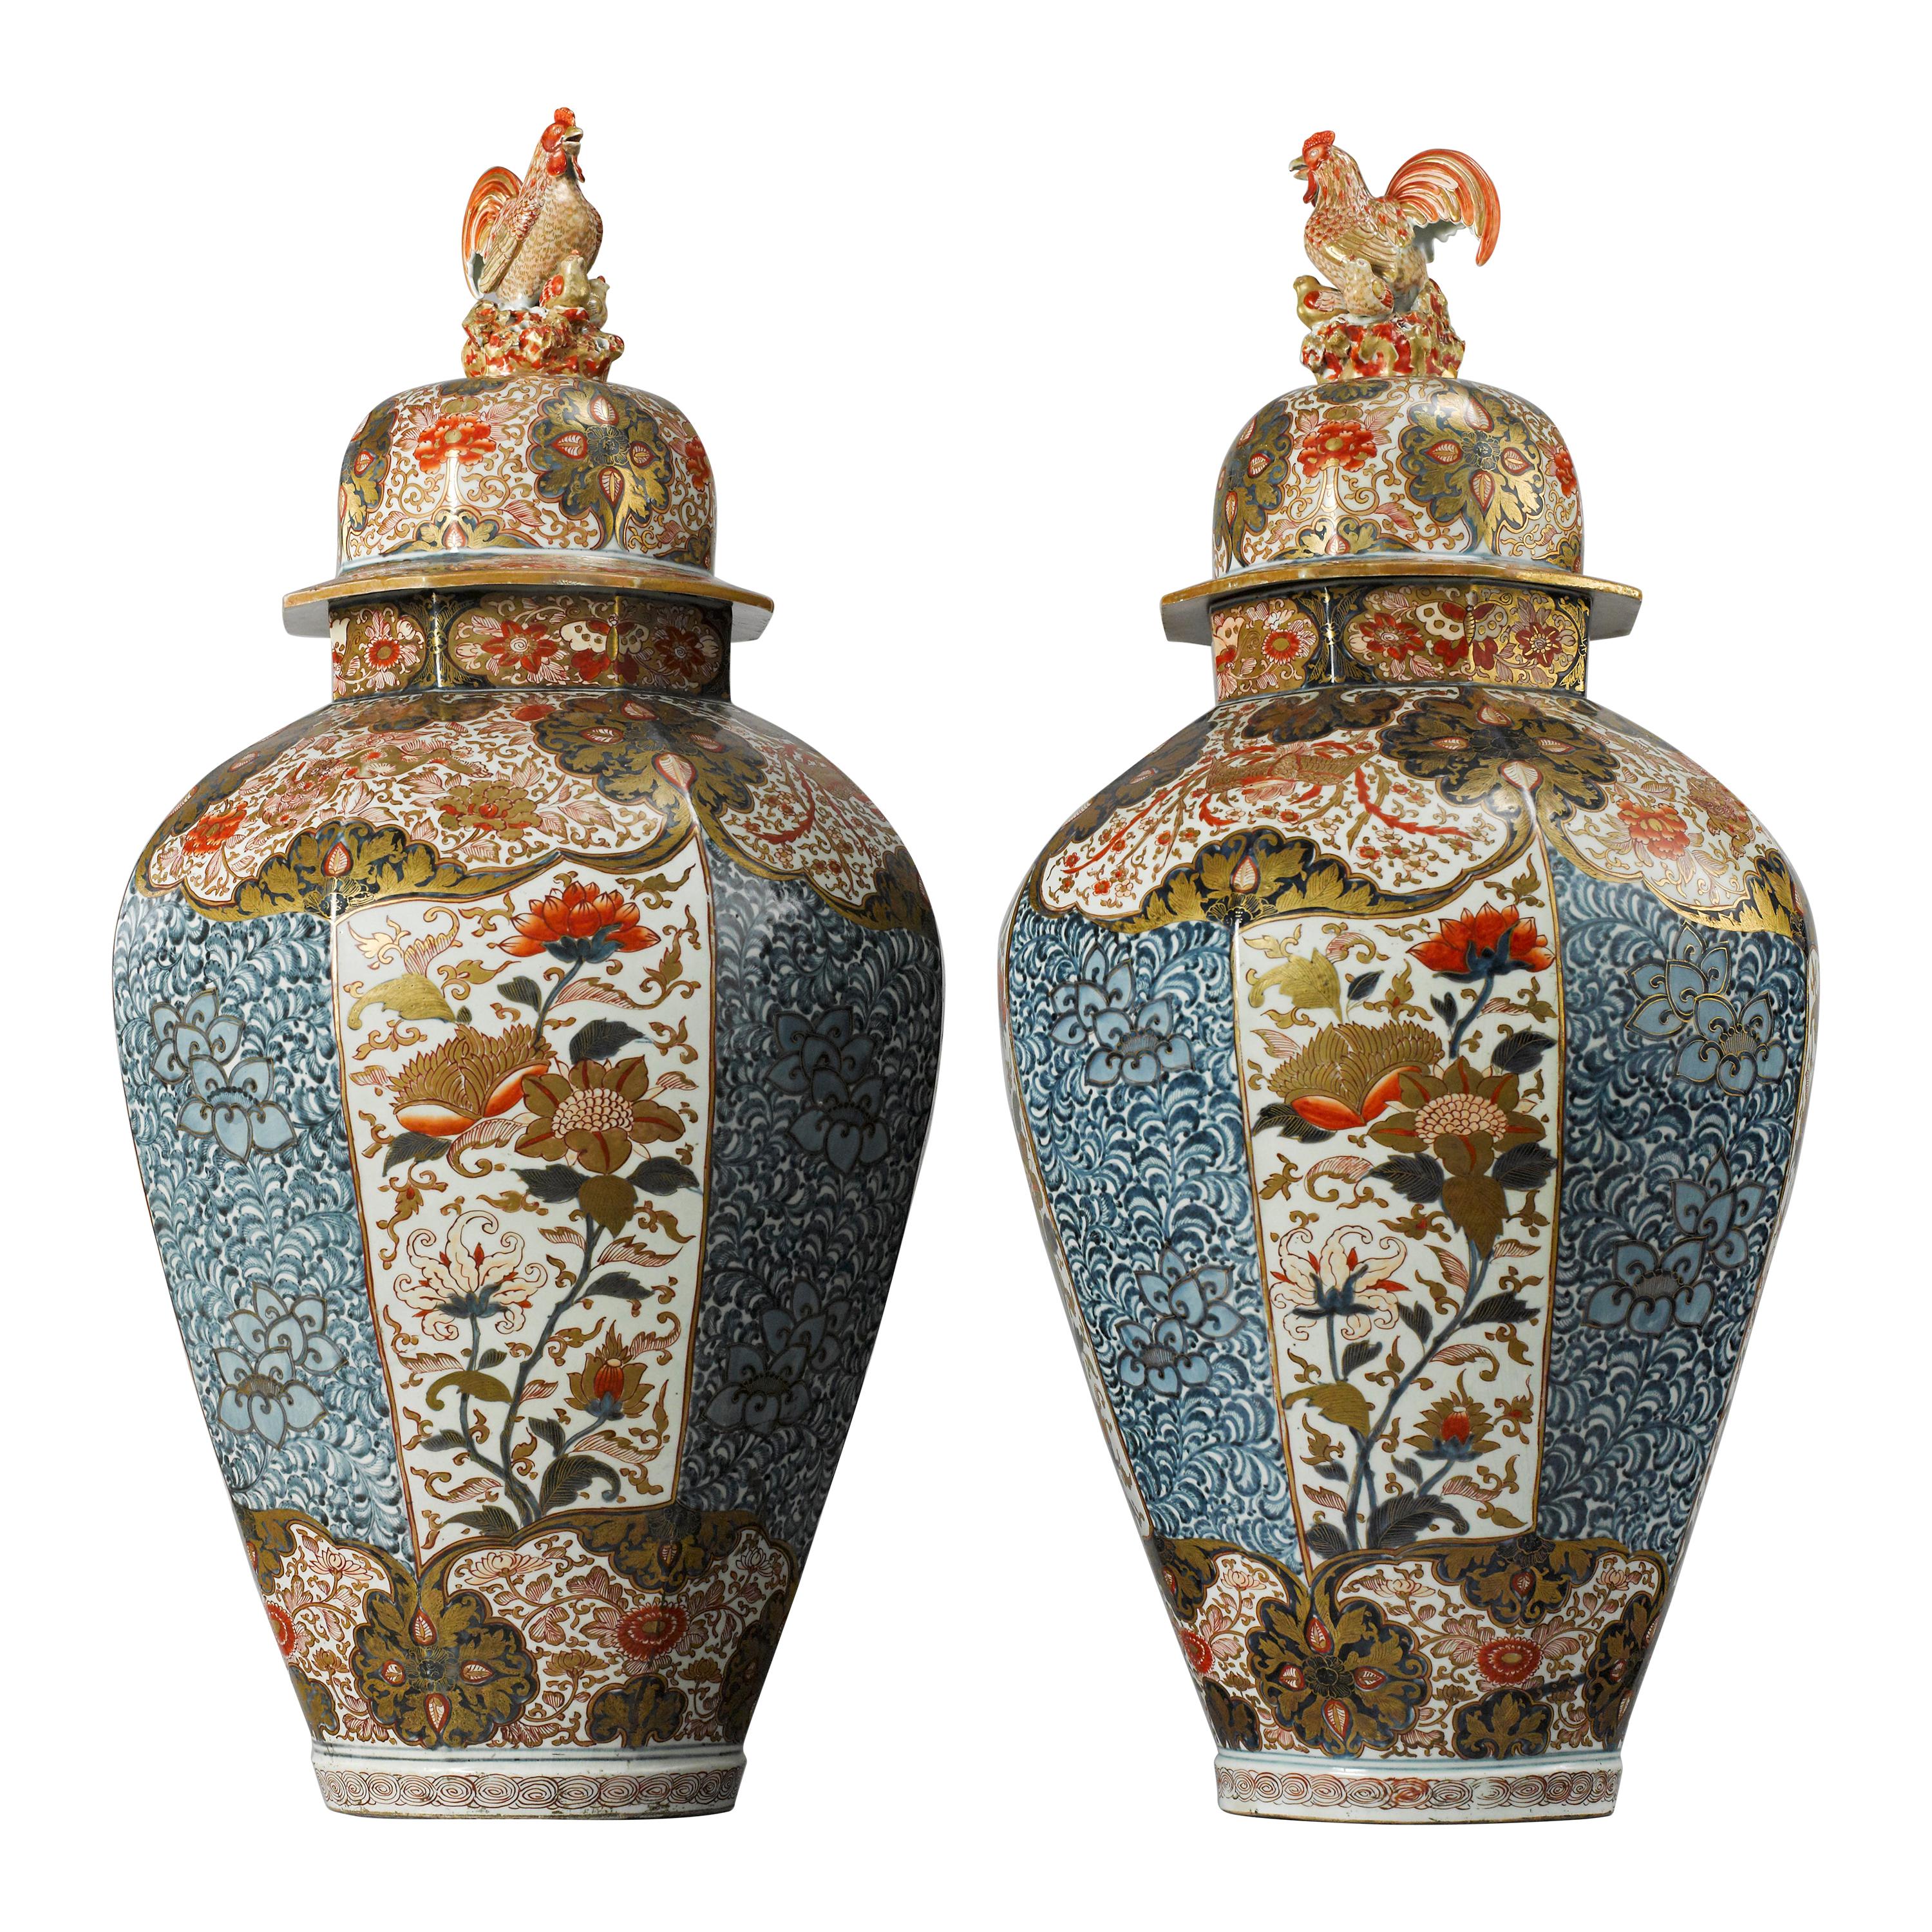 Large Pair of Late 17th Century Imari Vases with Cover